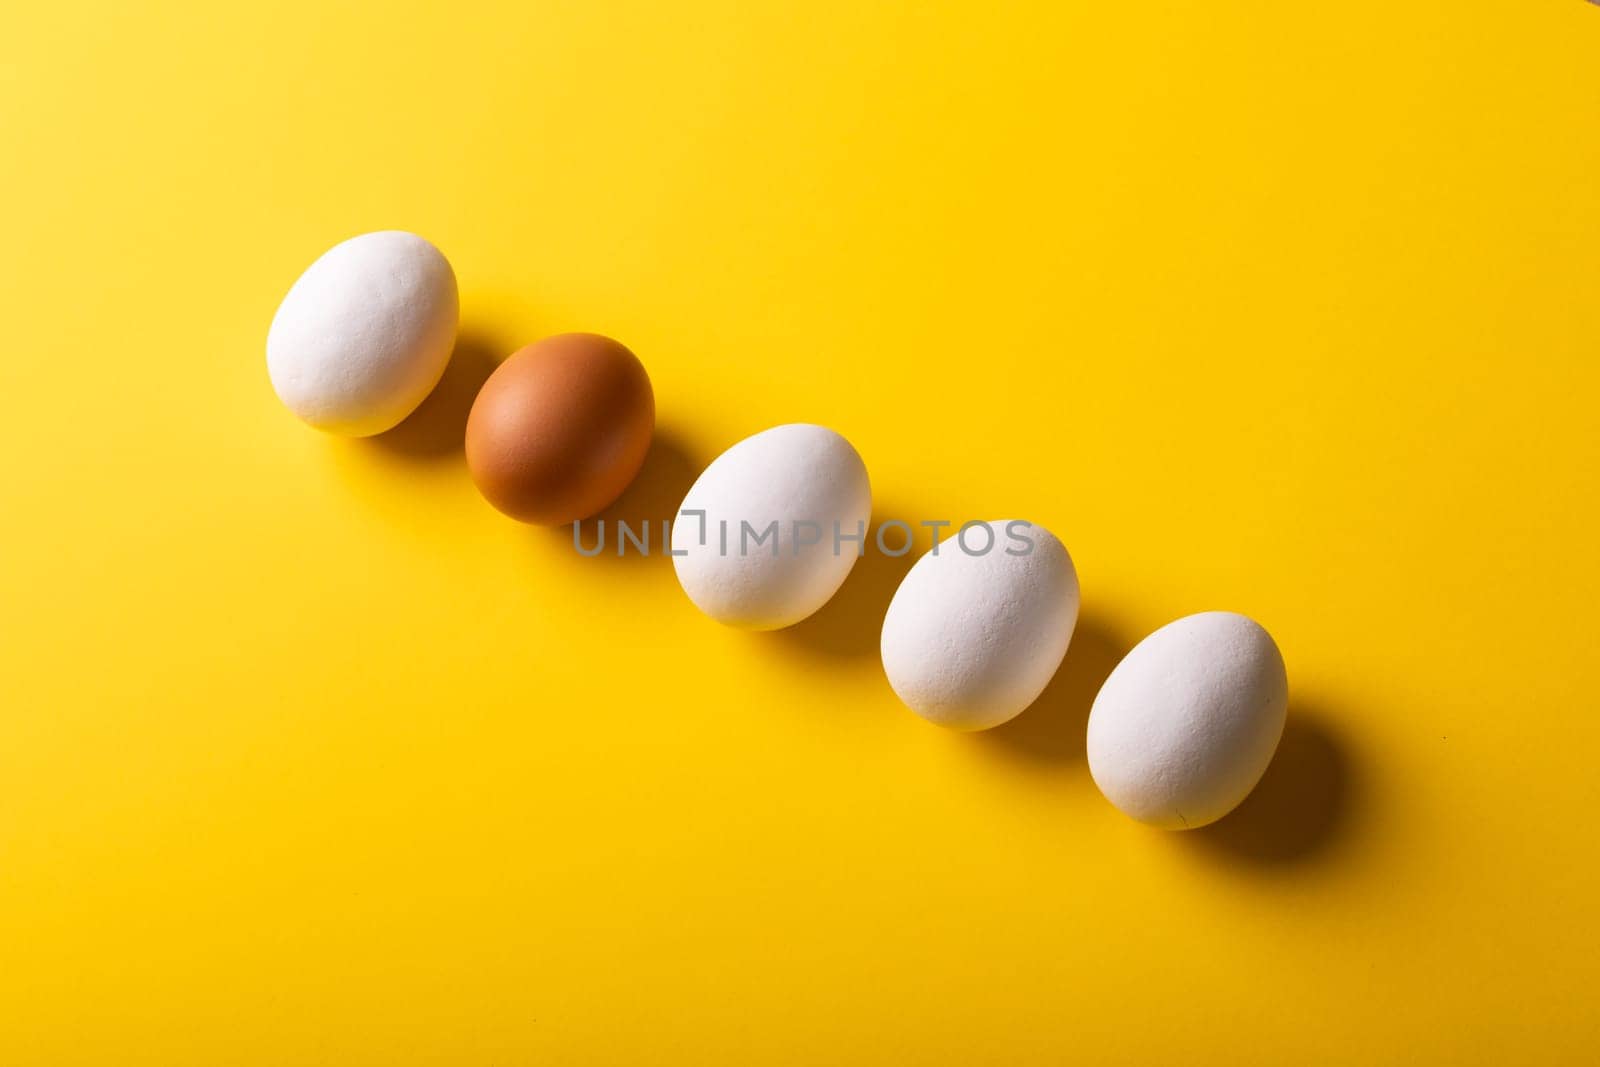 High angle view of brown and white eggs arranged side by side on yellow background with copy space. unaltered, food, healthy eating concept.